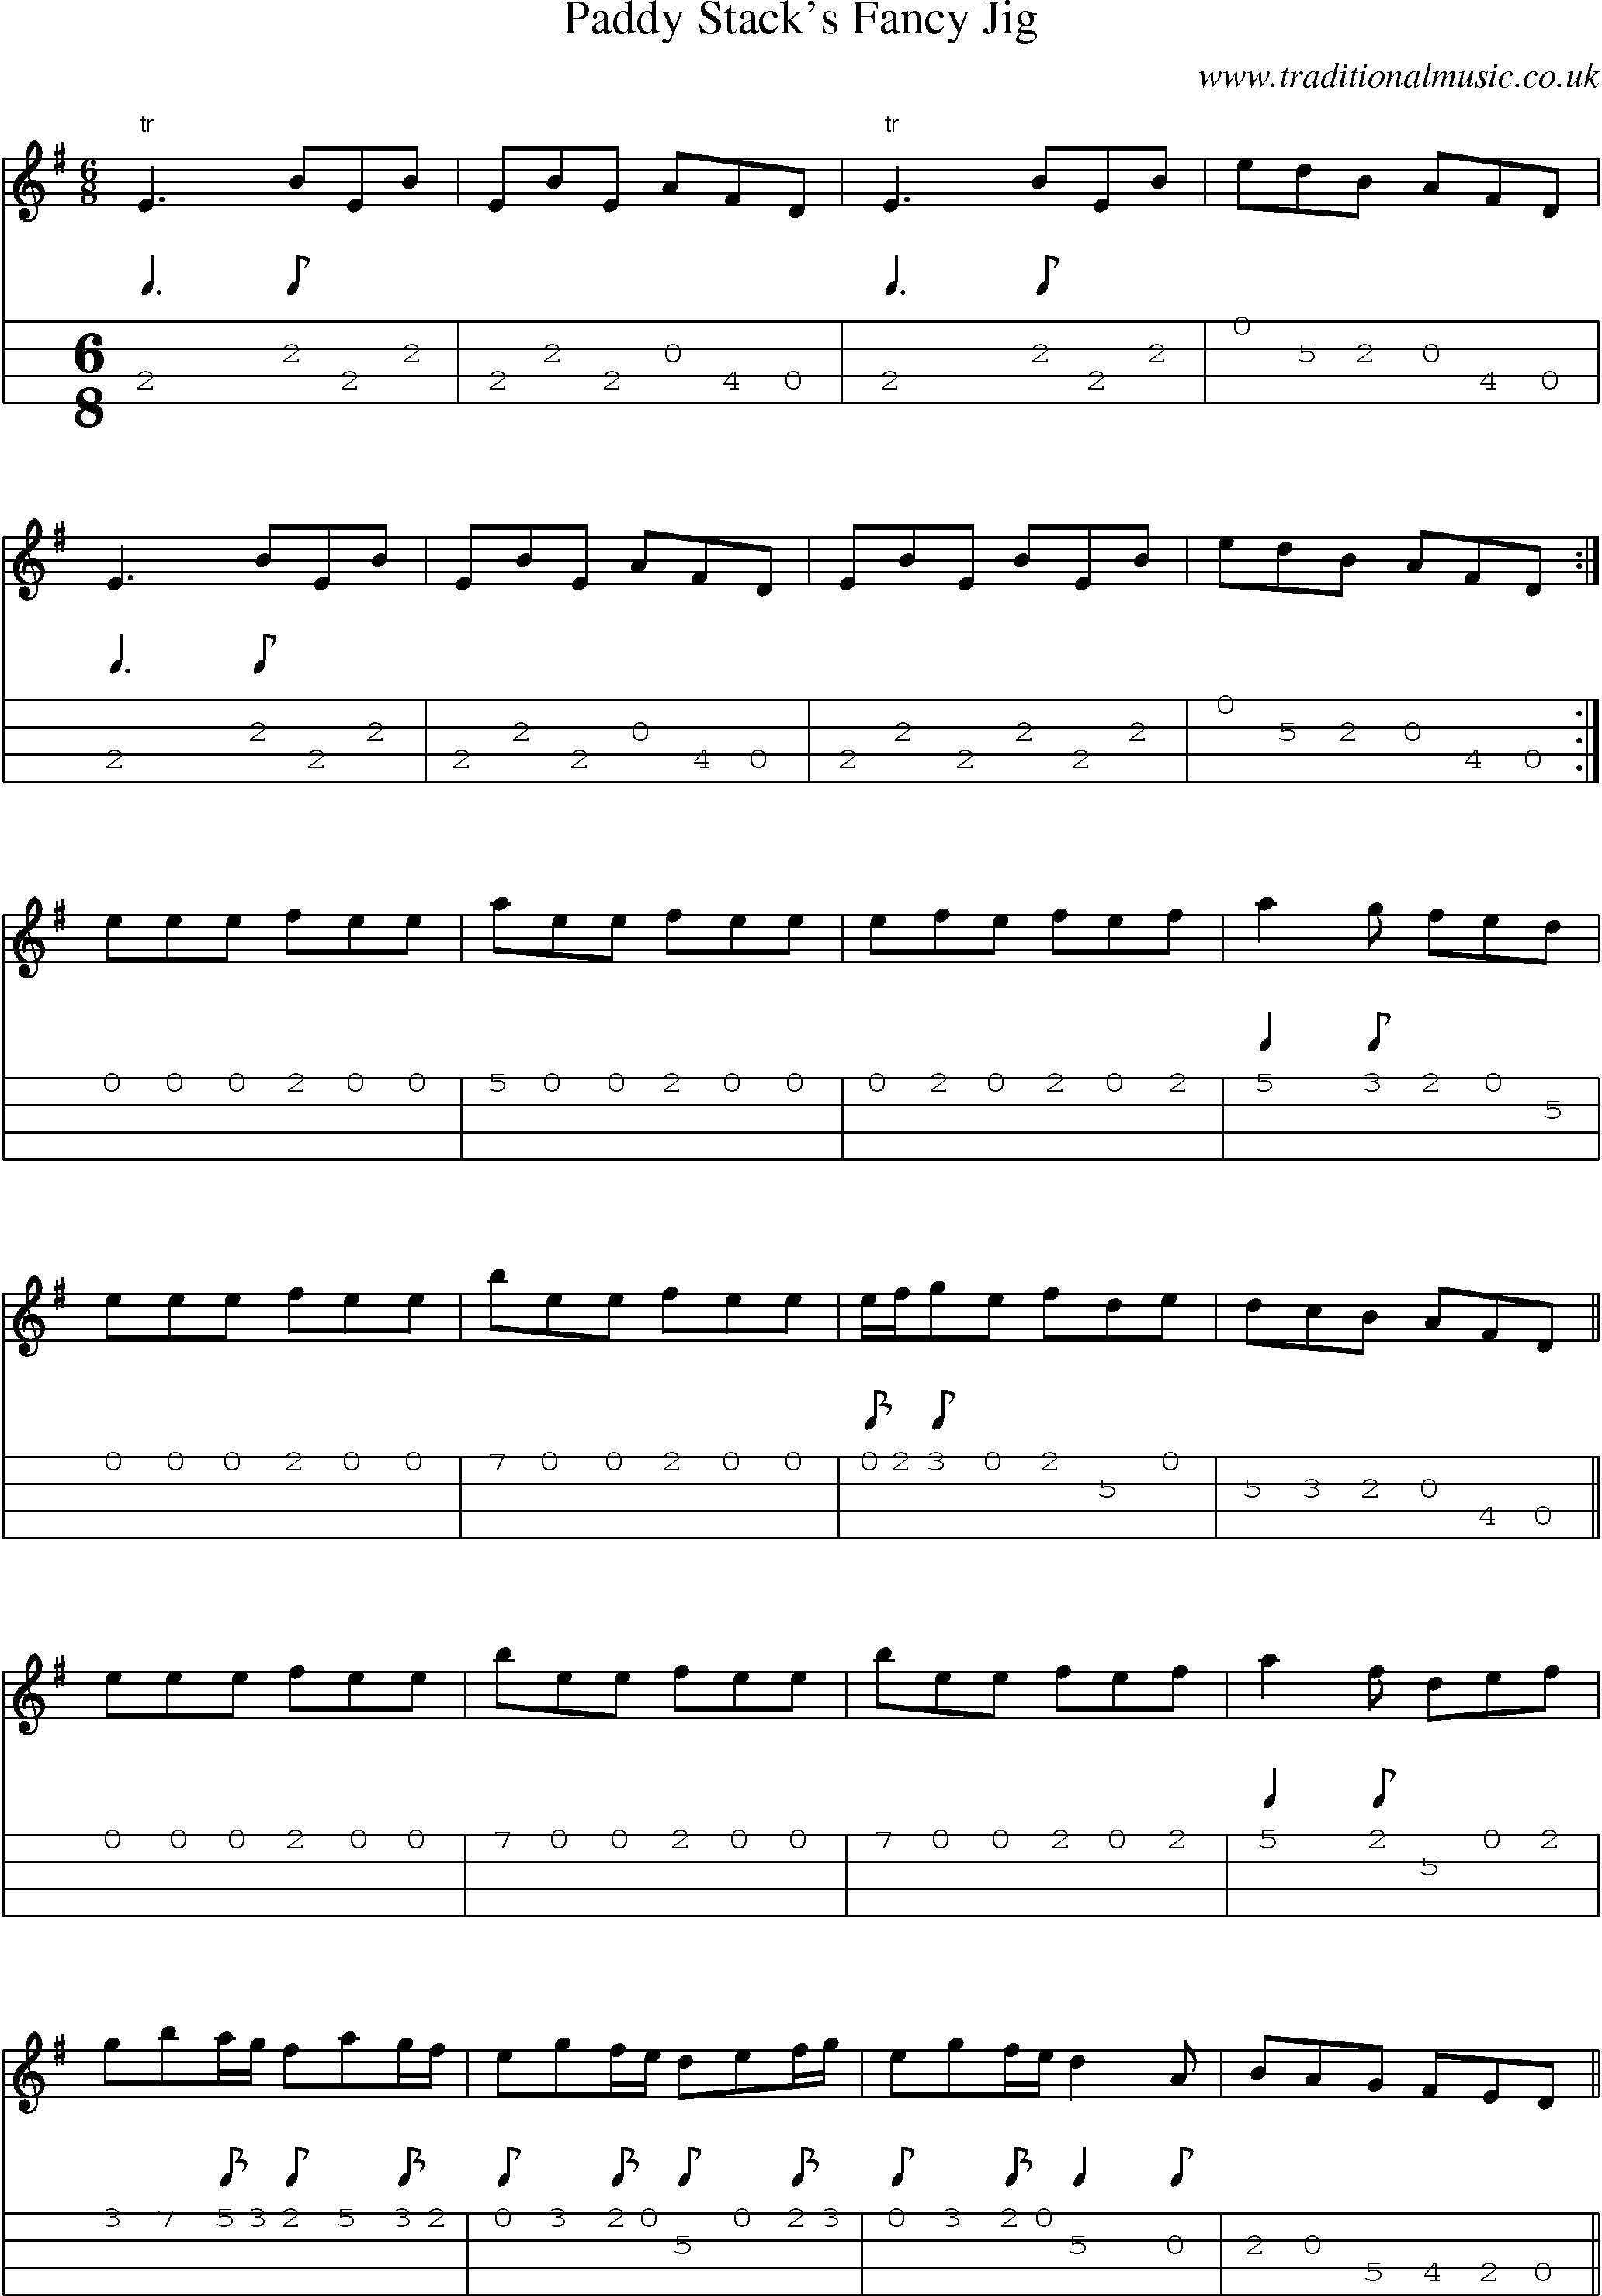 Music Score and Mandolin Tabs for Paddy Stacks Fancy Jig